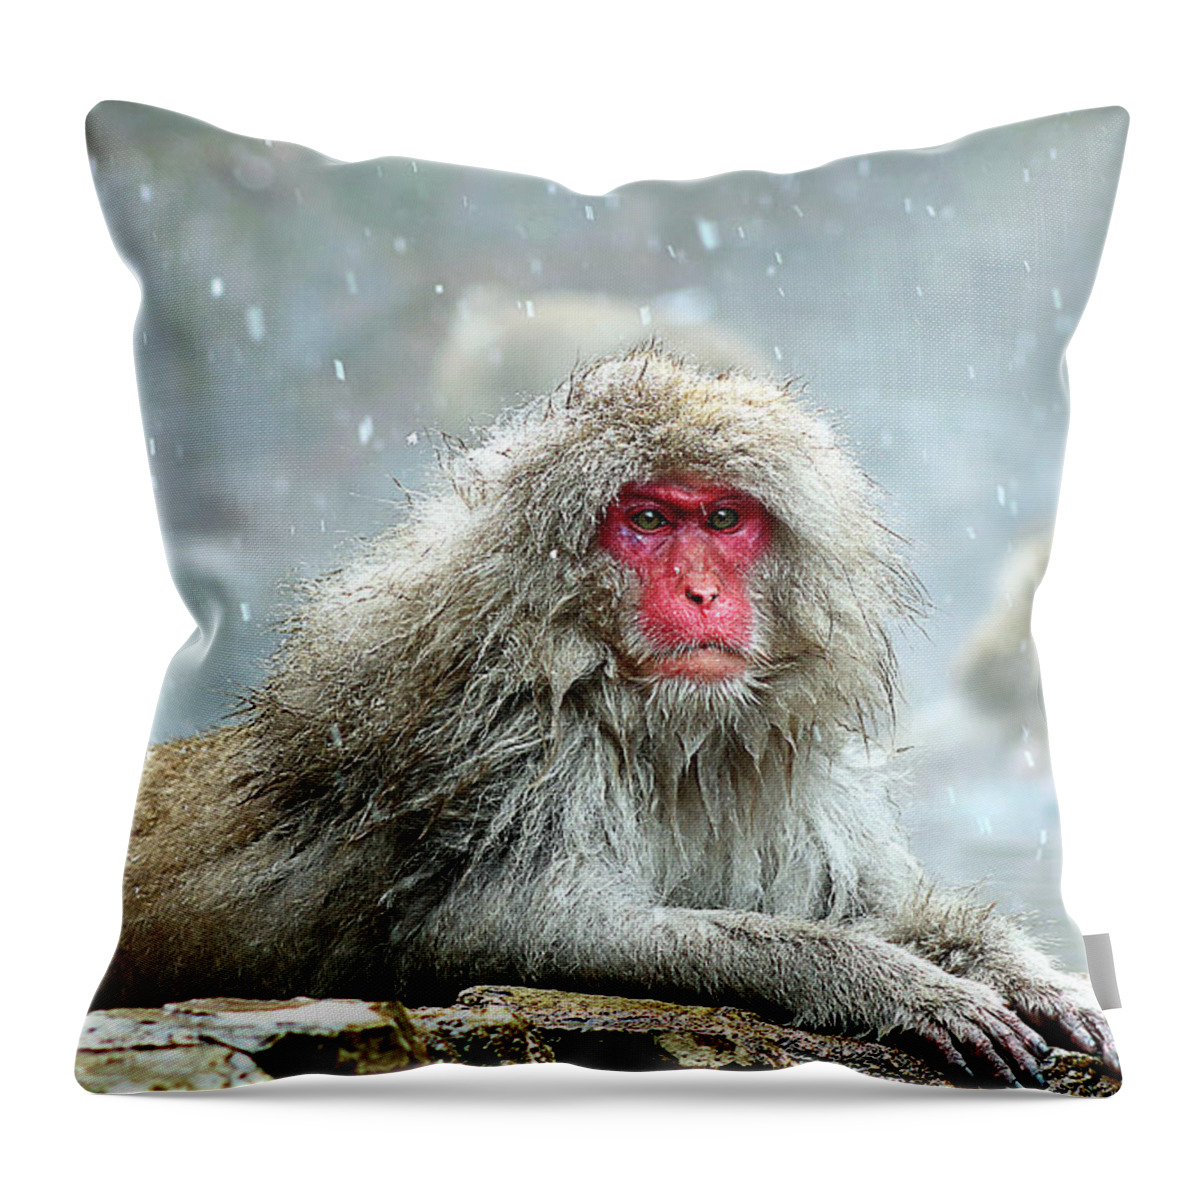  Throw Pillow featuring the photograph Japan 48 by Eric Pengelly